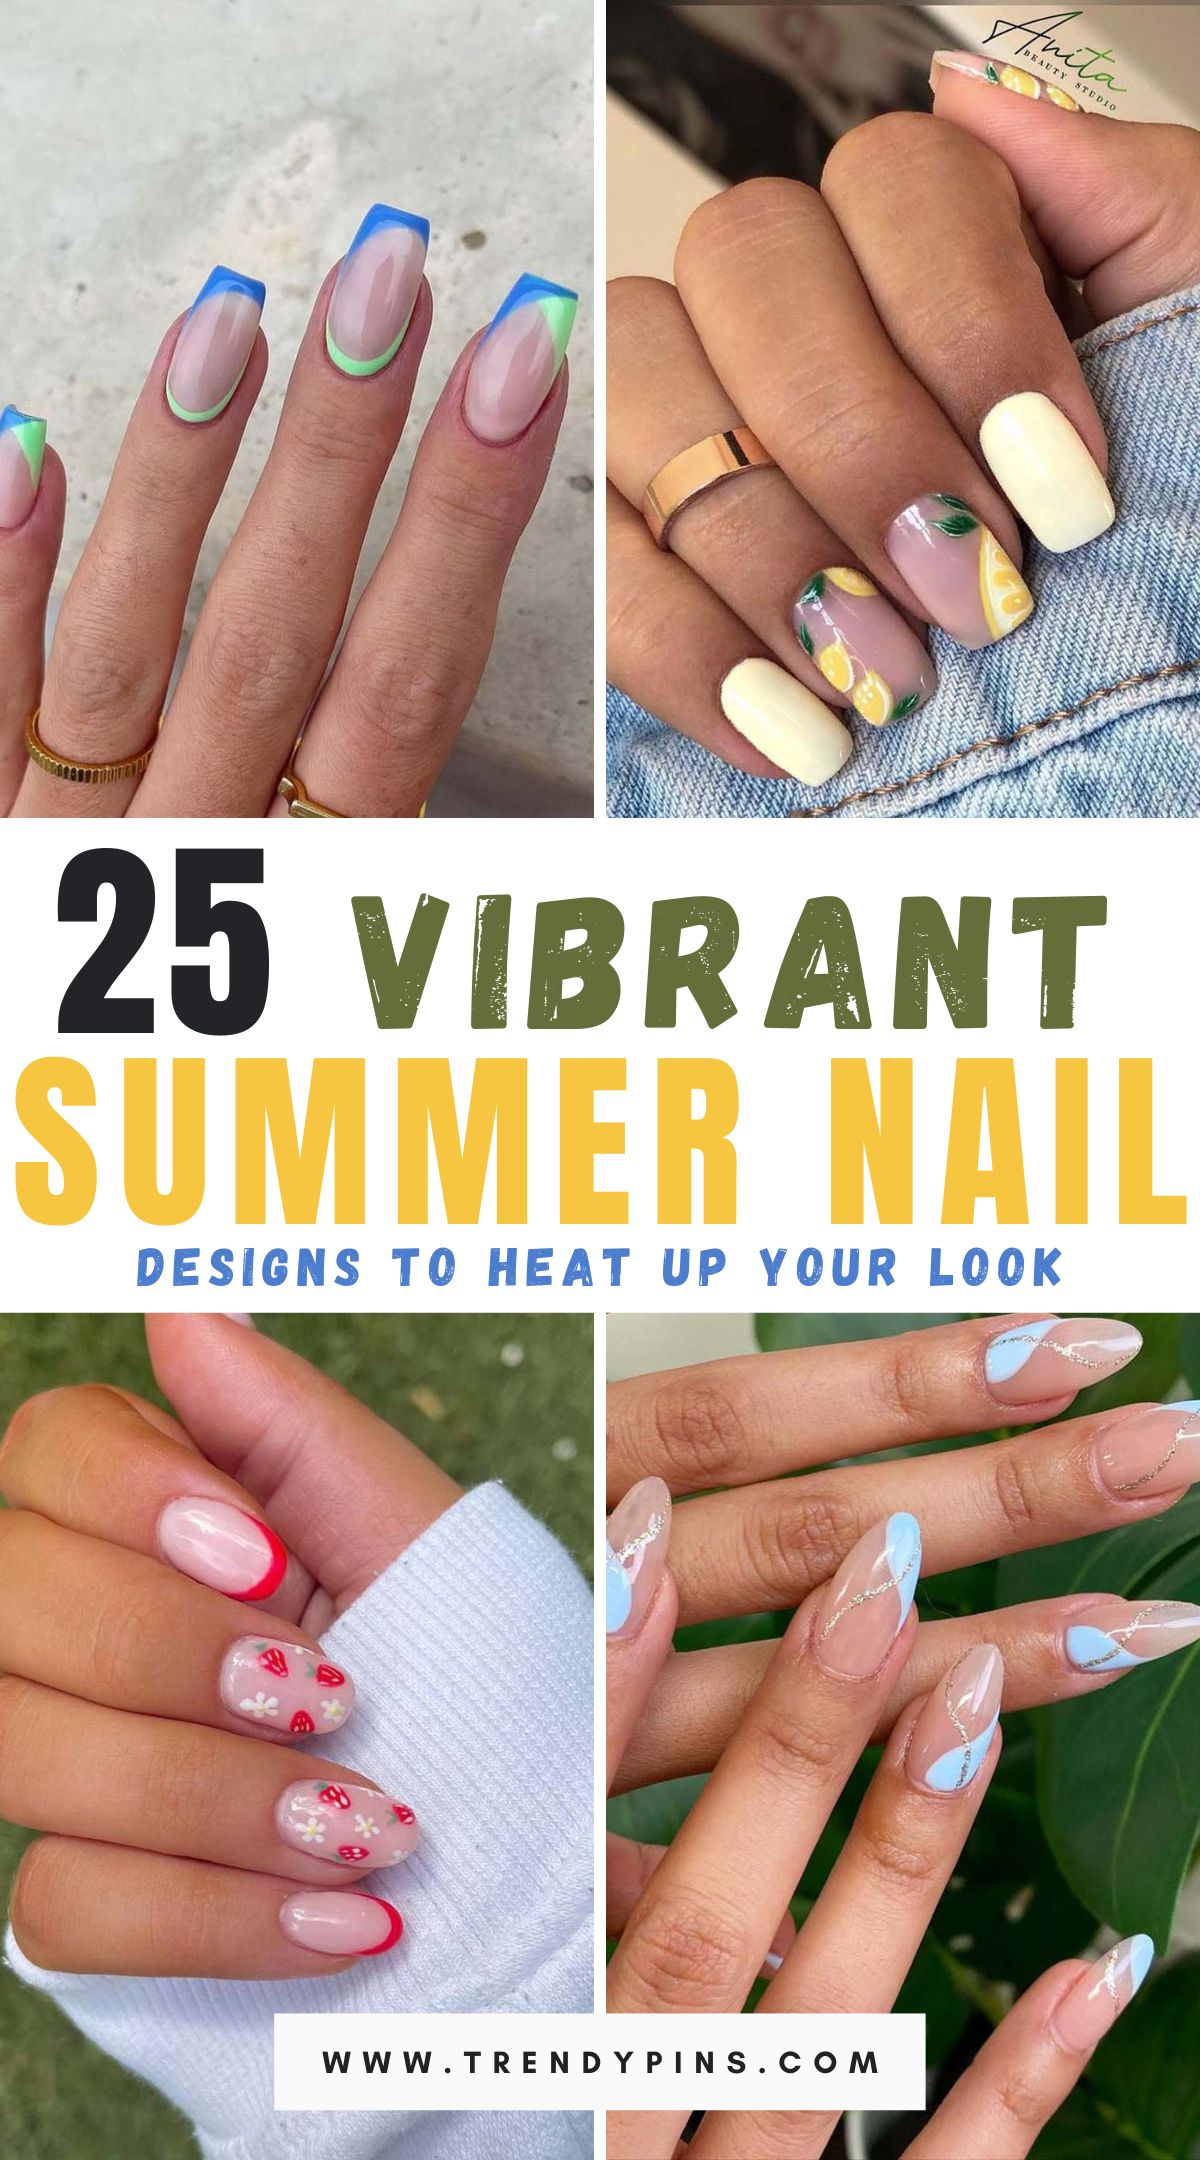 Explore 25 eye-catching summer nail designs to flaunt your trendy style. Get inspired with vibrant colors and patterns perfect for the season.